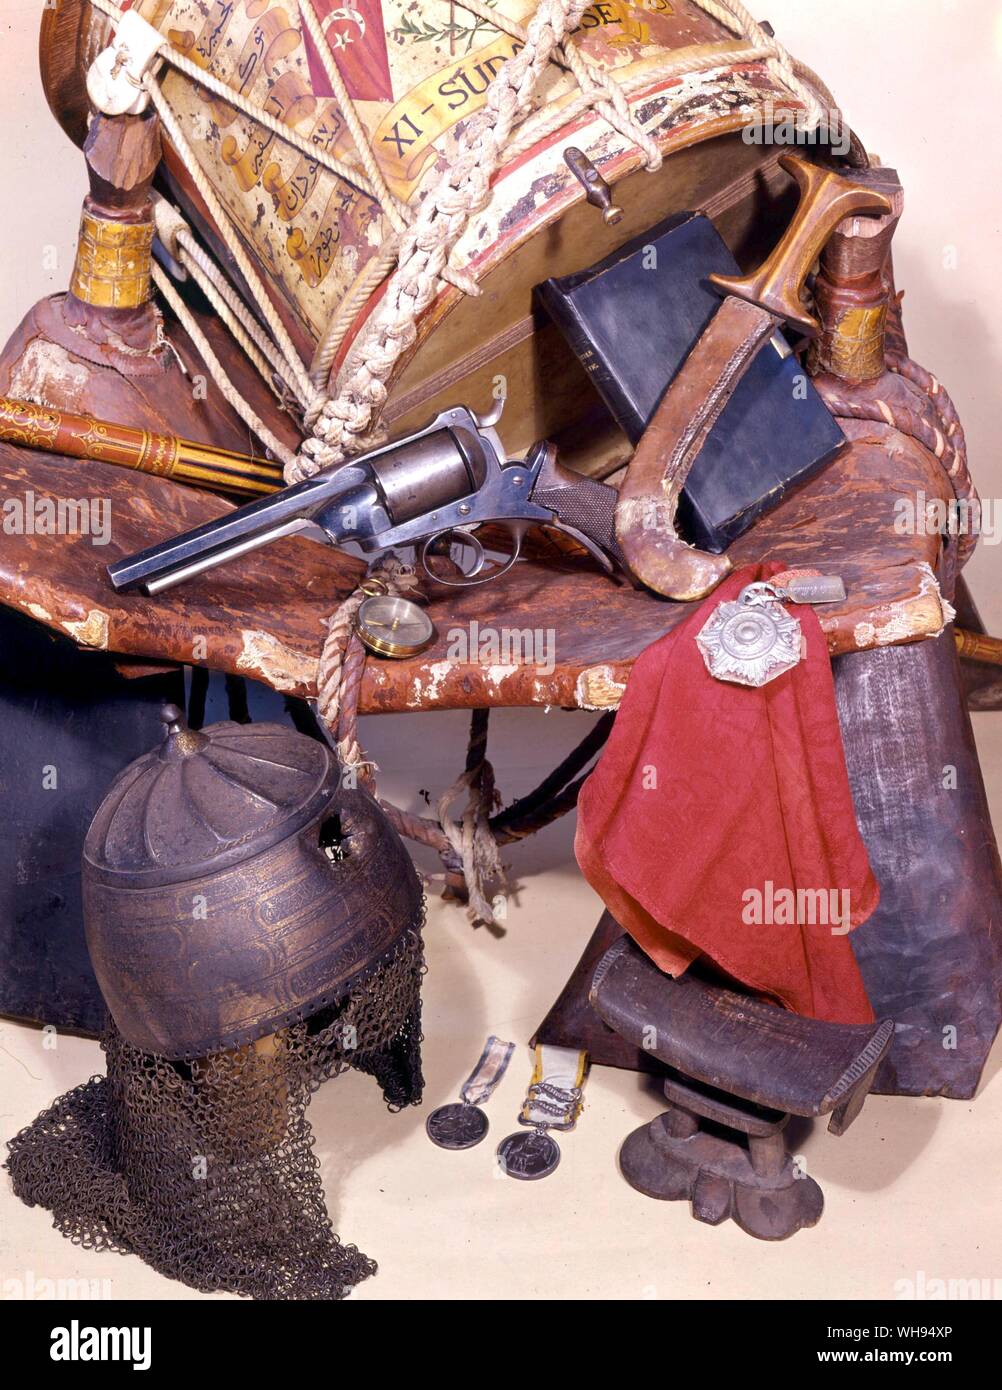 Some of Charles George Gordons belongings a drum belonging to the 11th Sudanese regiment, Gordon's camel saddle, compass, revolver, headrest and Bible, the Sultan of Darfur's helmet captured after his death in battle in 1879 medals struck by Gordon at Khartoum and those he won in Crimea Stock Photo